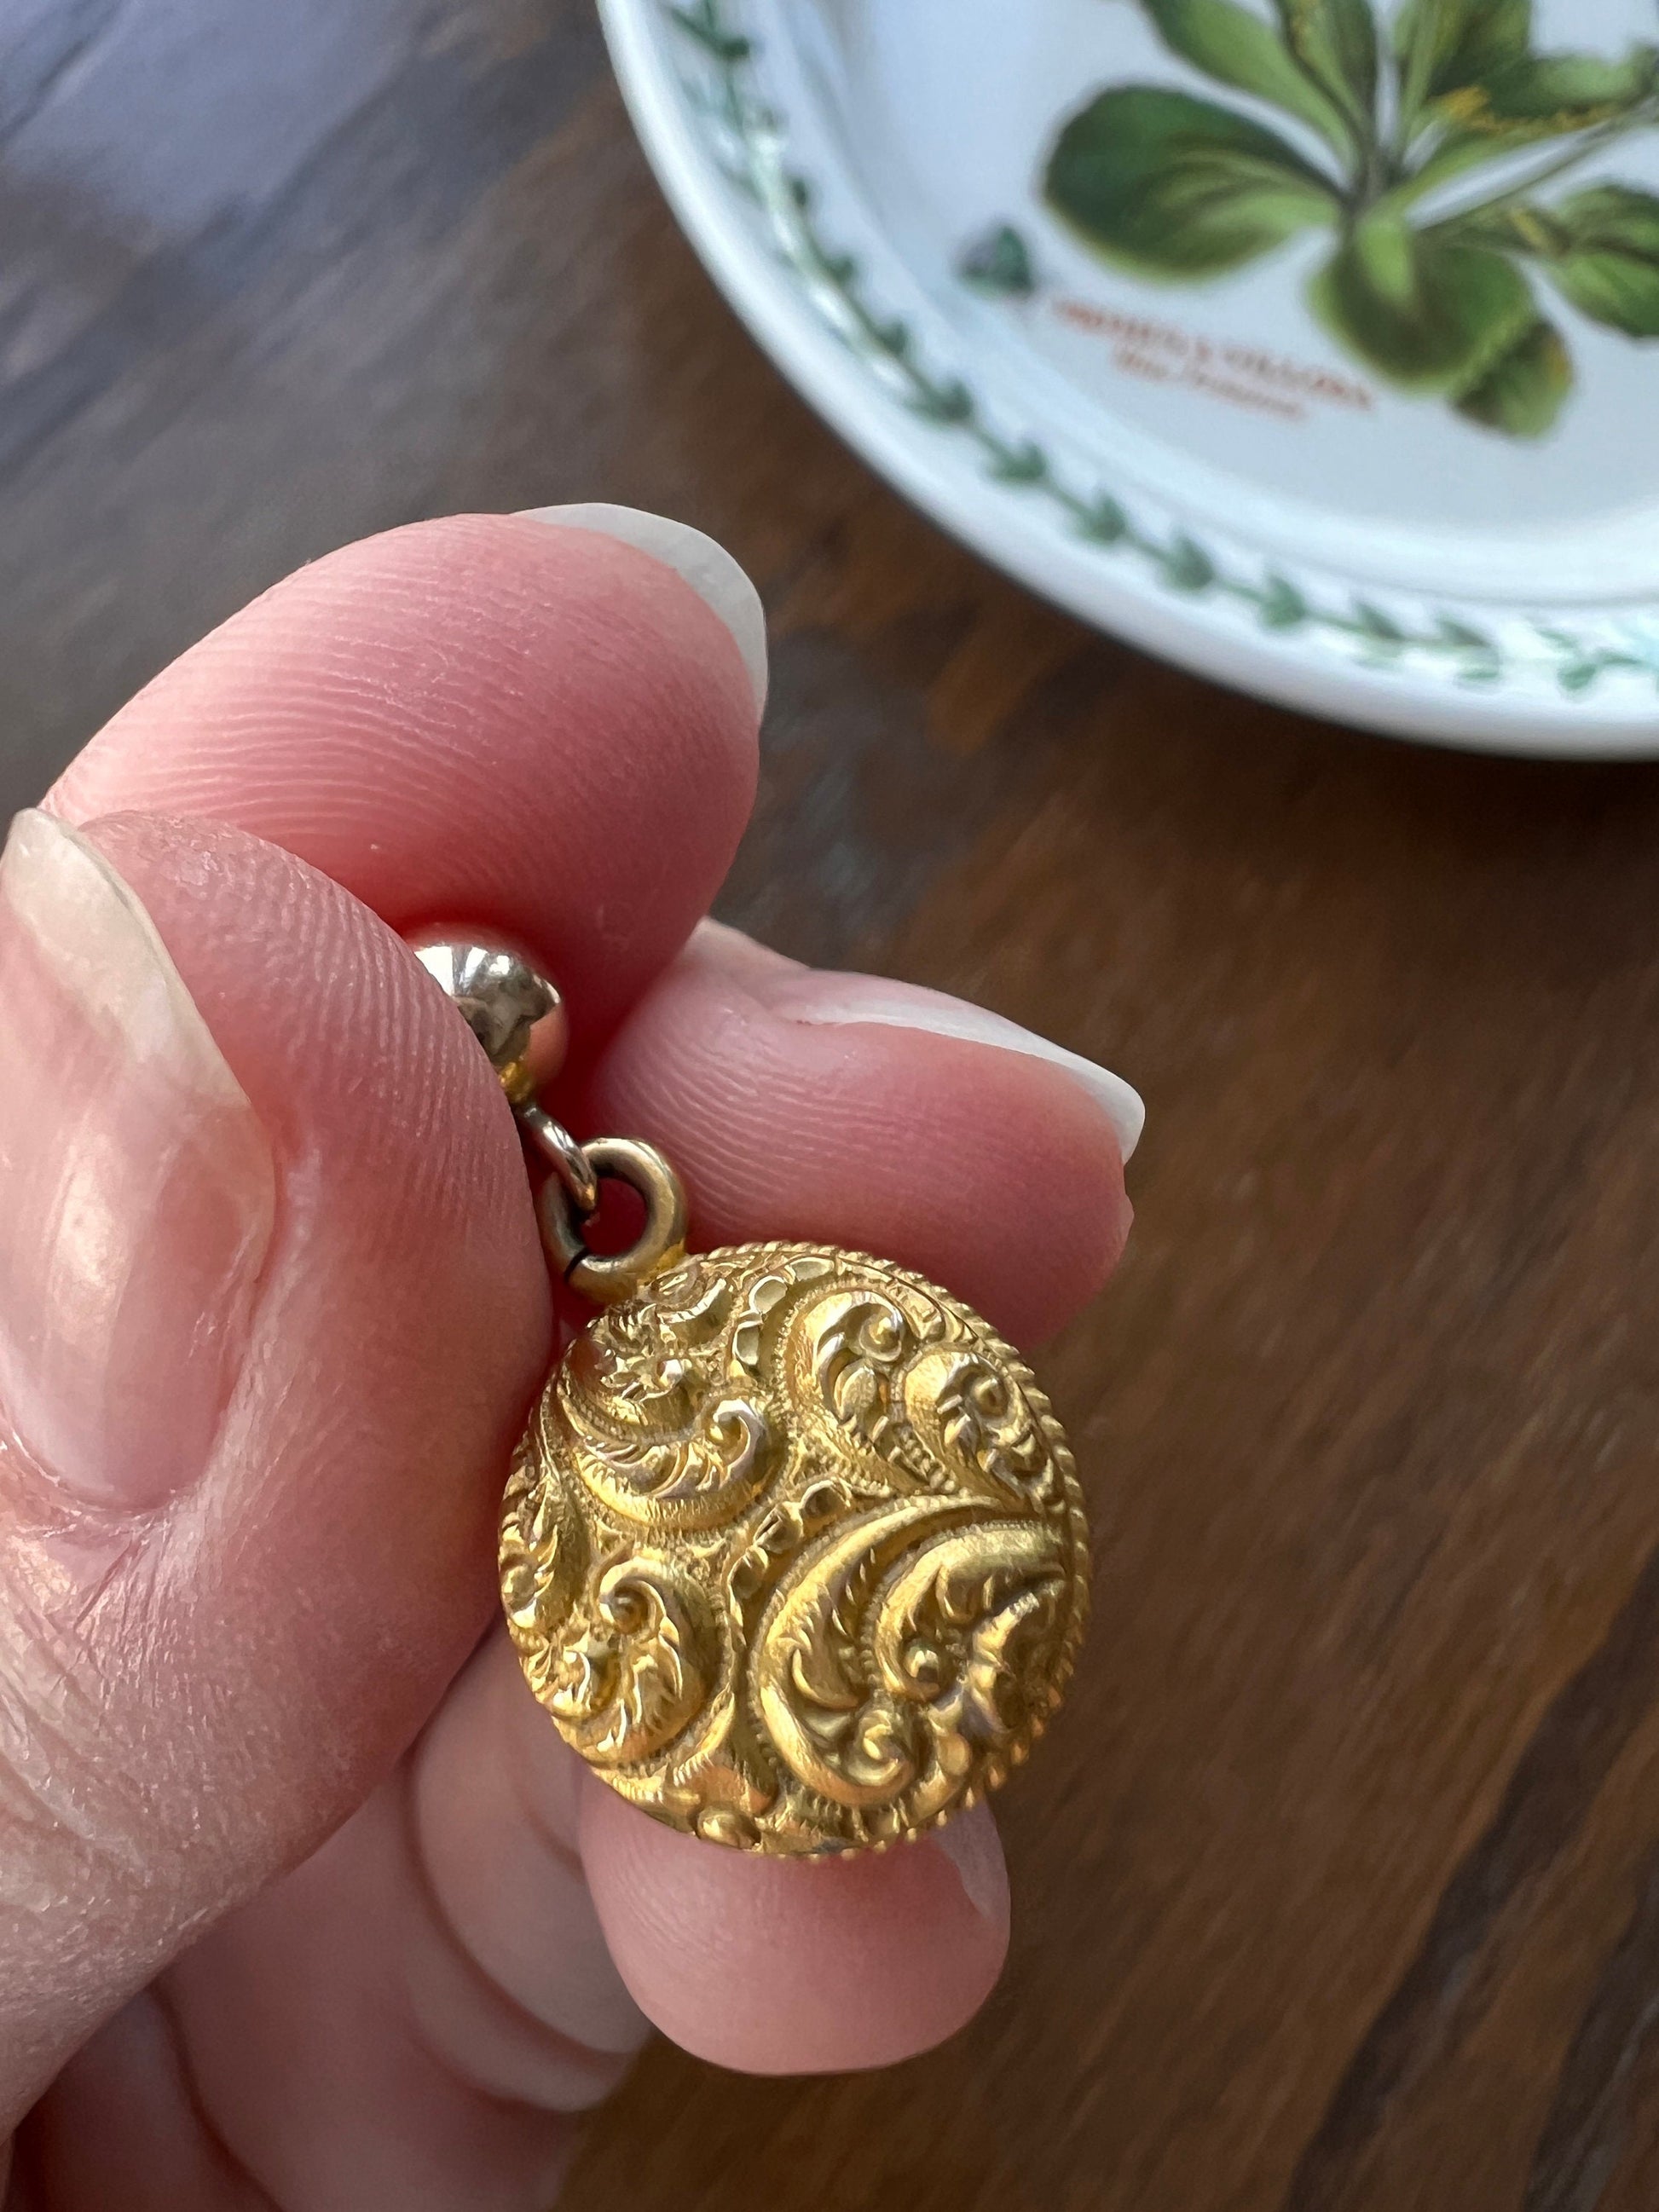 STAR Rose Cut DIAMOND Figural ANTIQUE Lucky Charm 14k Gold Pendant Reversible 2 Sided Belle Epoque 3D Victorian Ornate Jewelry Puffy Circle